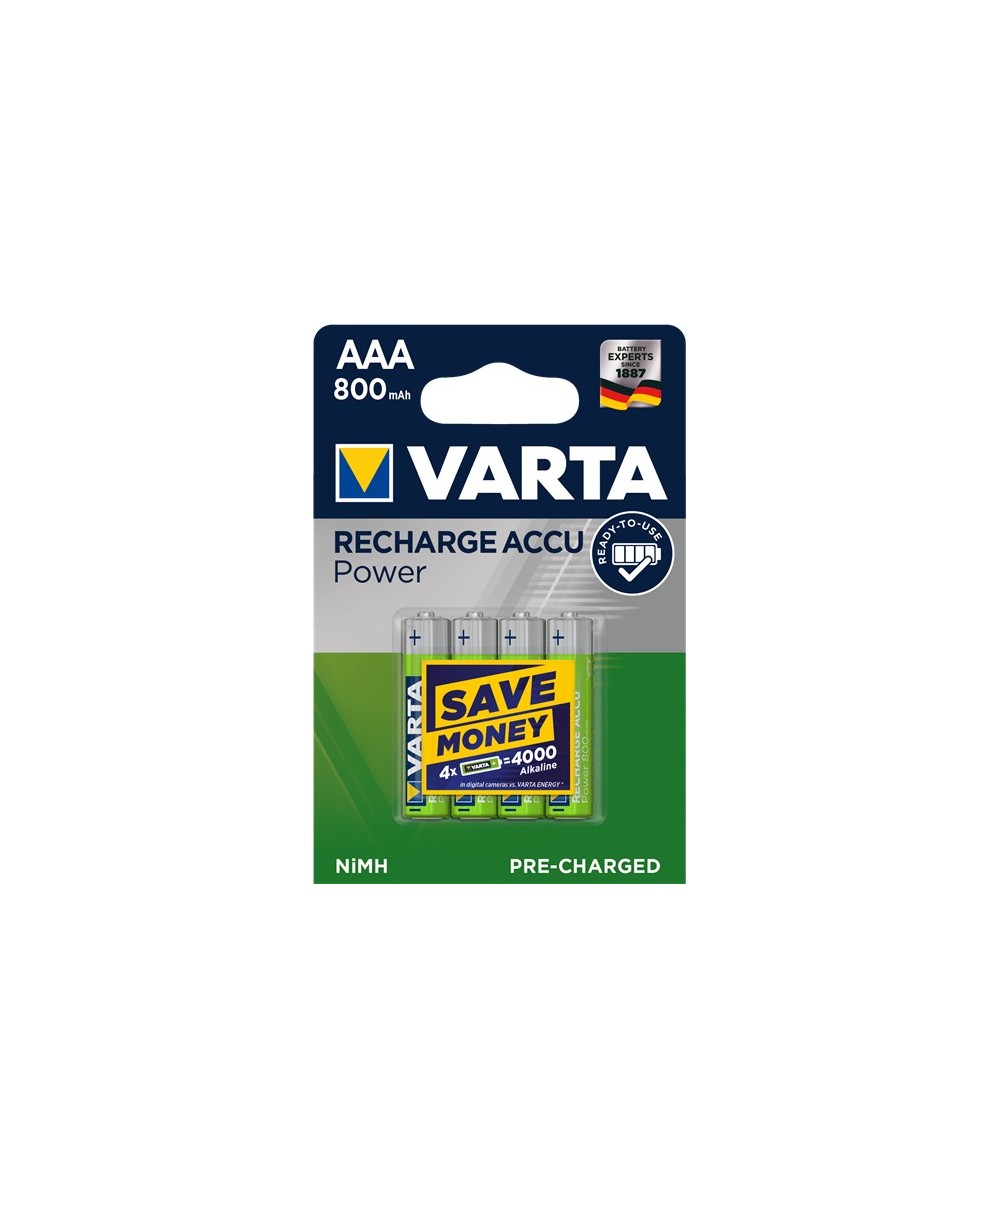 1x4 Varta Batterie Rechargeable AAA Ready2Use NiMH 800 mAH Micro Batteries rechargeables Universelles